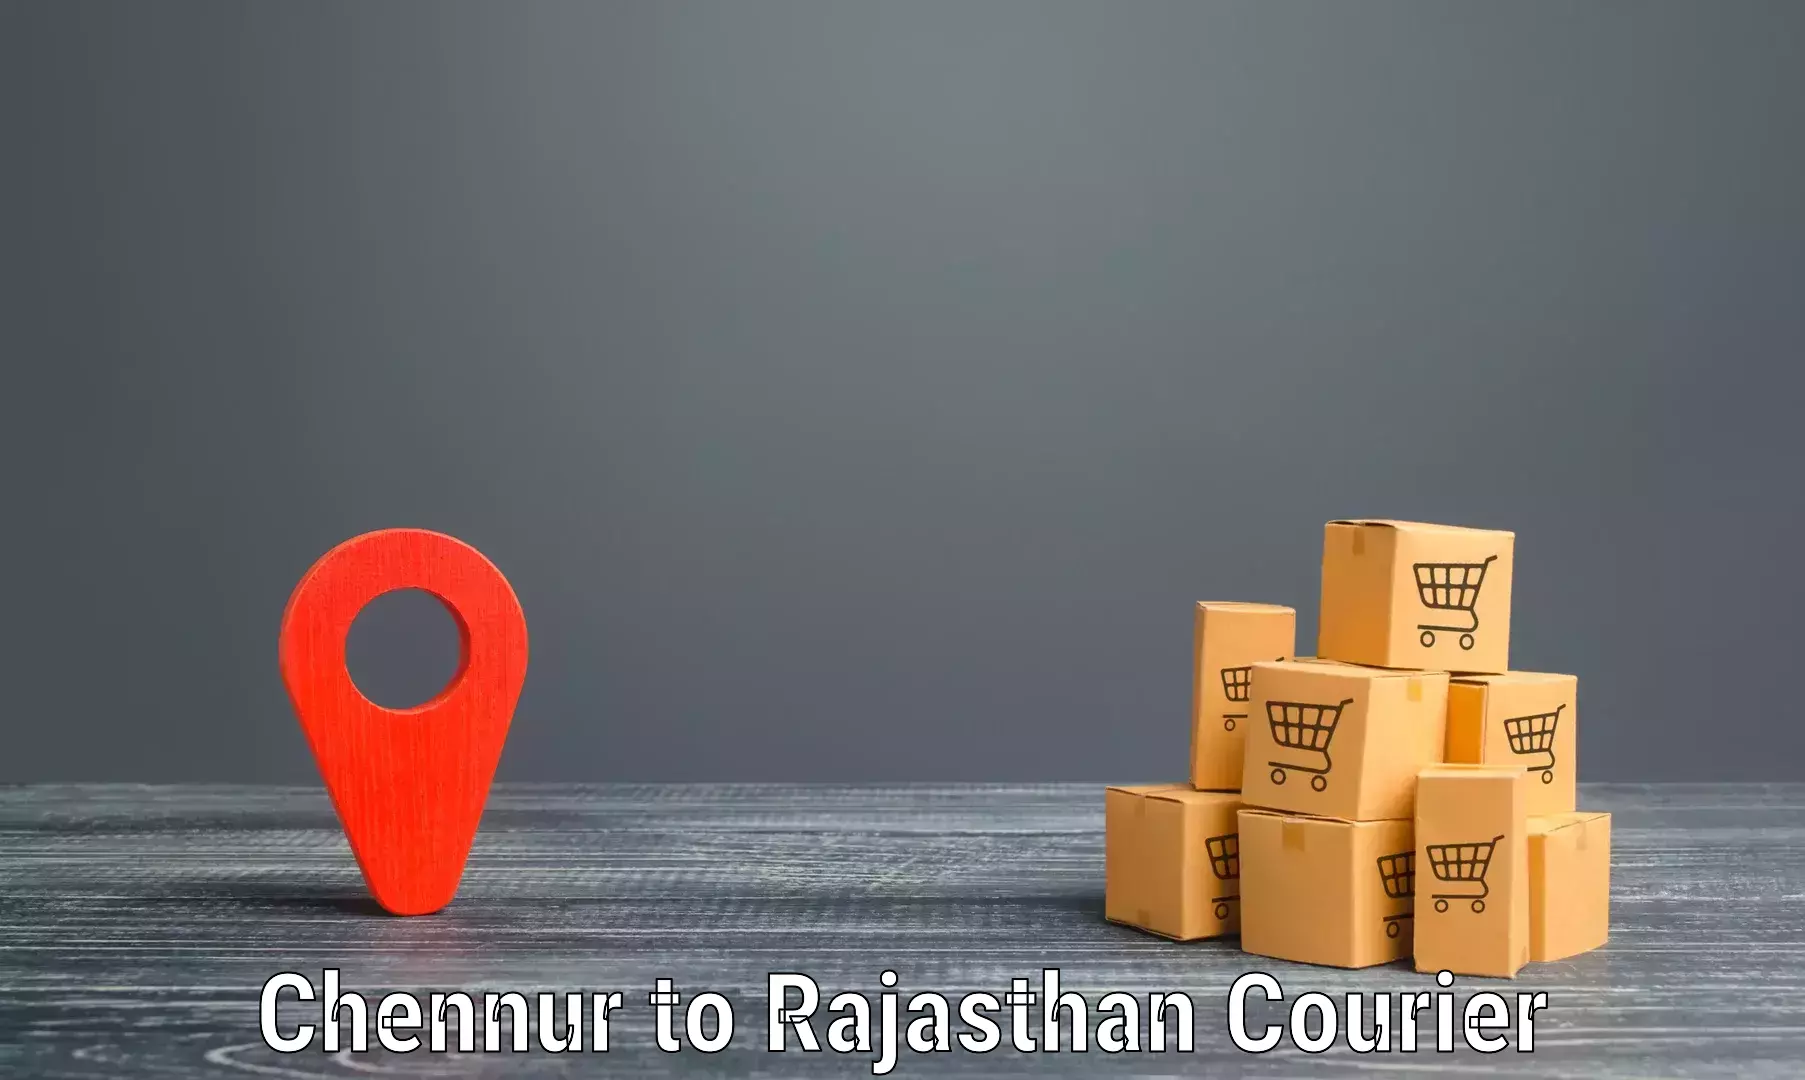 Express package transport in Chennur to Jaipur